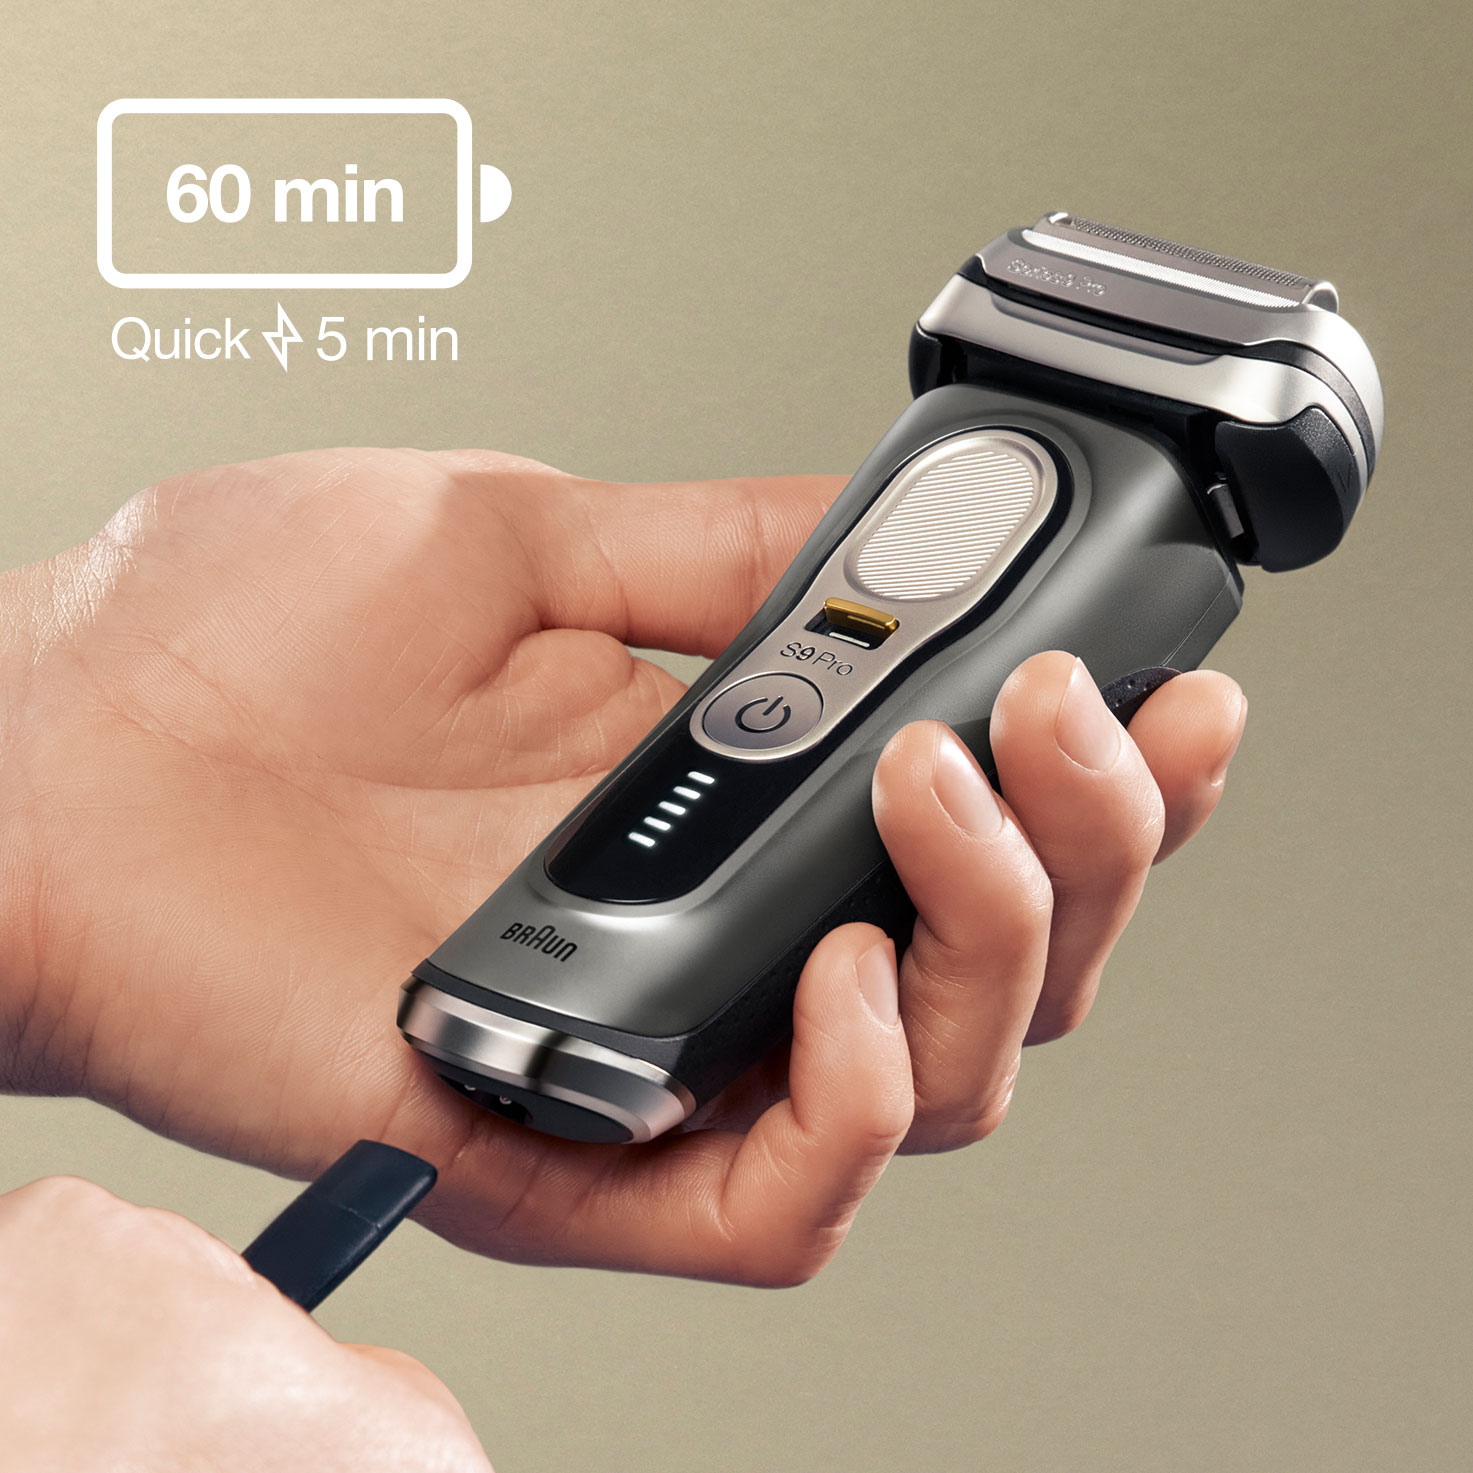 Series 9 Pro 9465cc Wet & Dry shaver with SmartCare center and